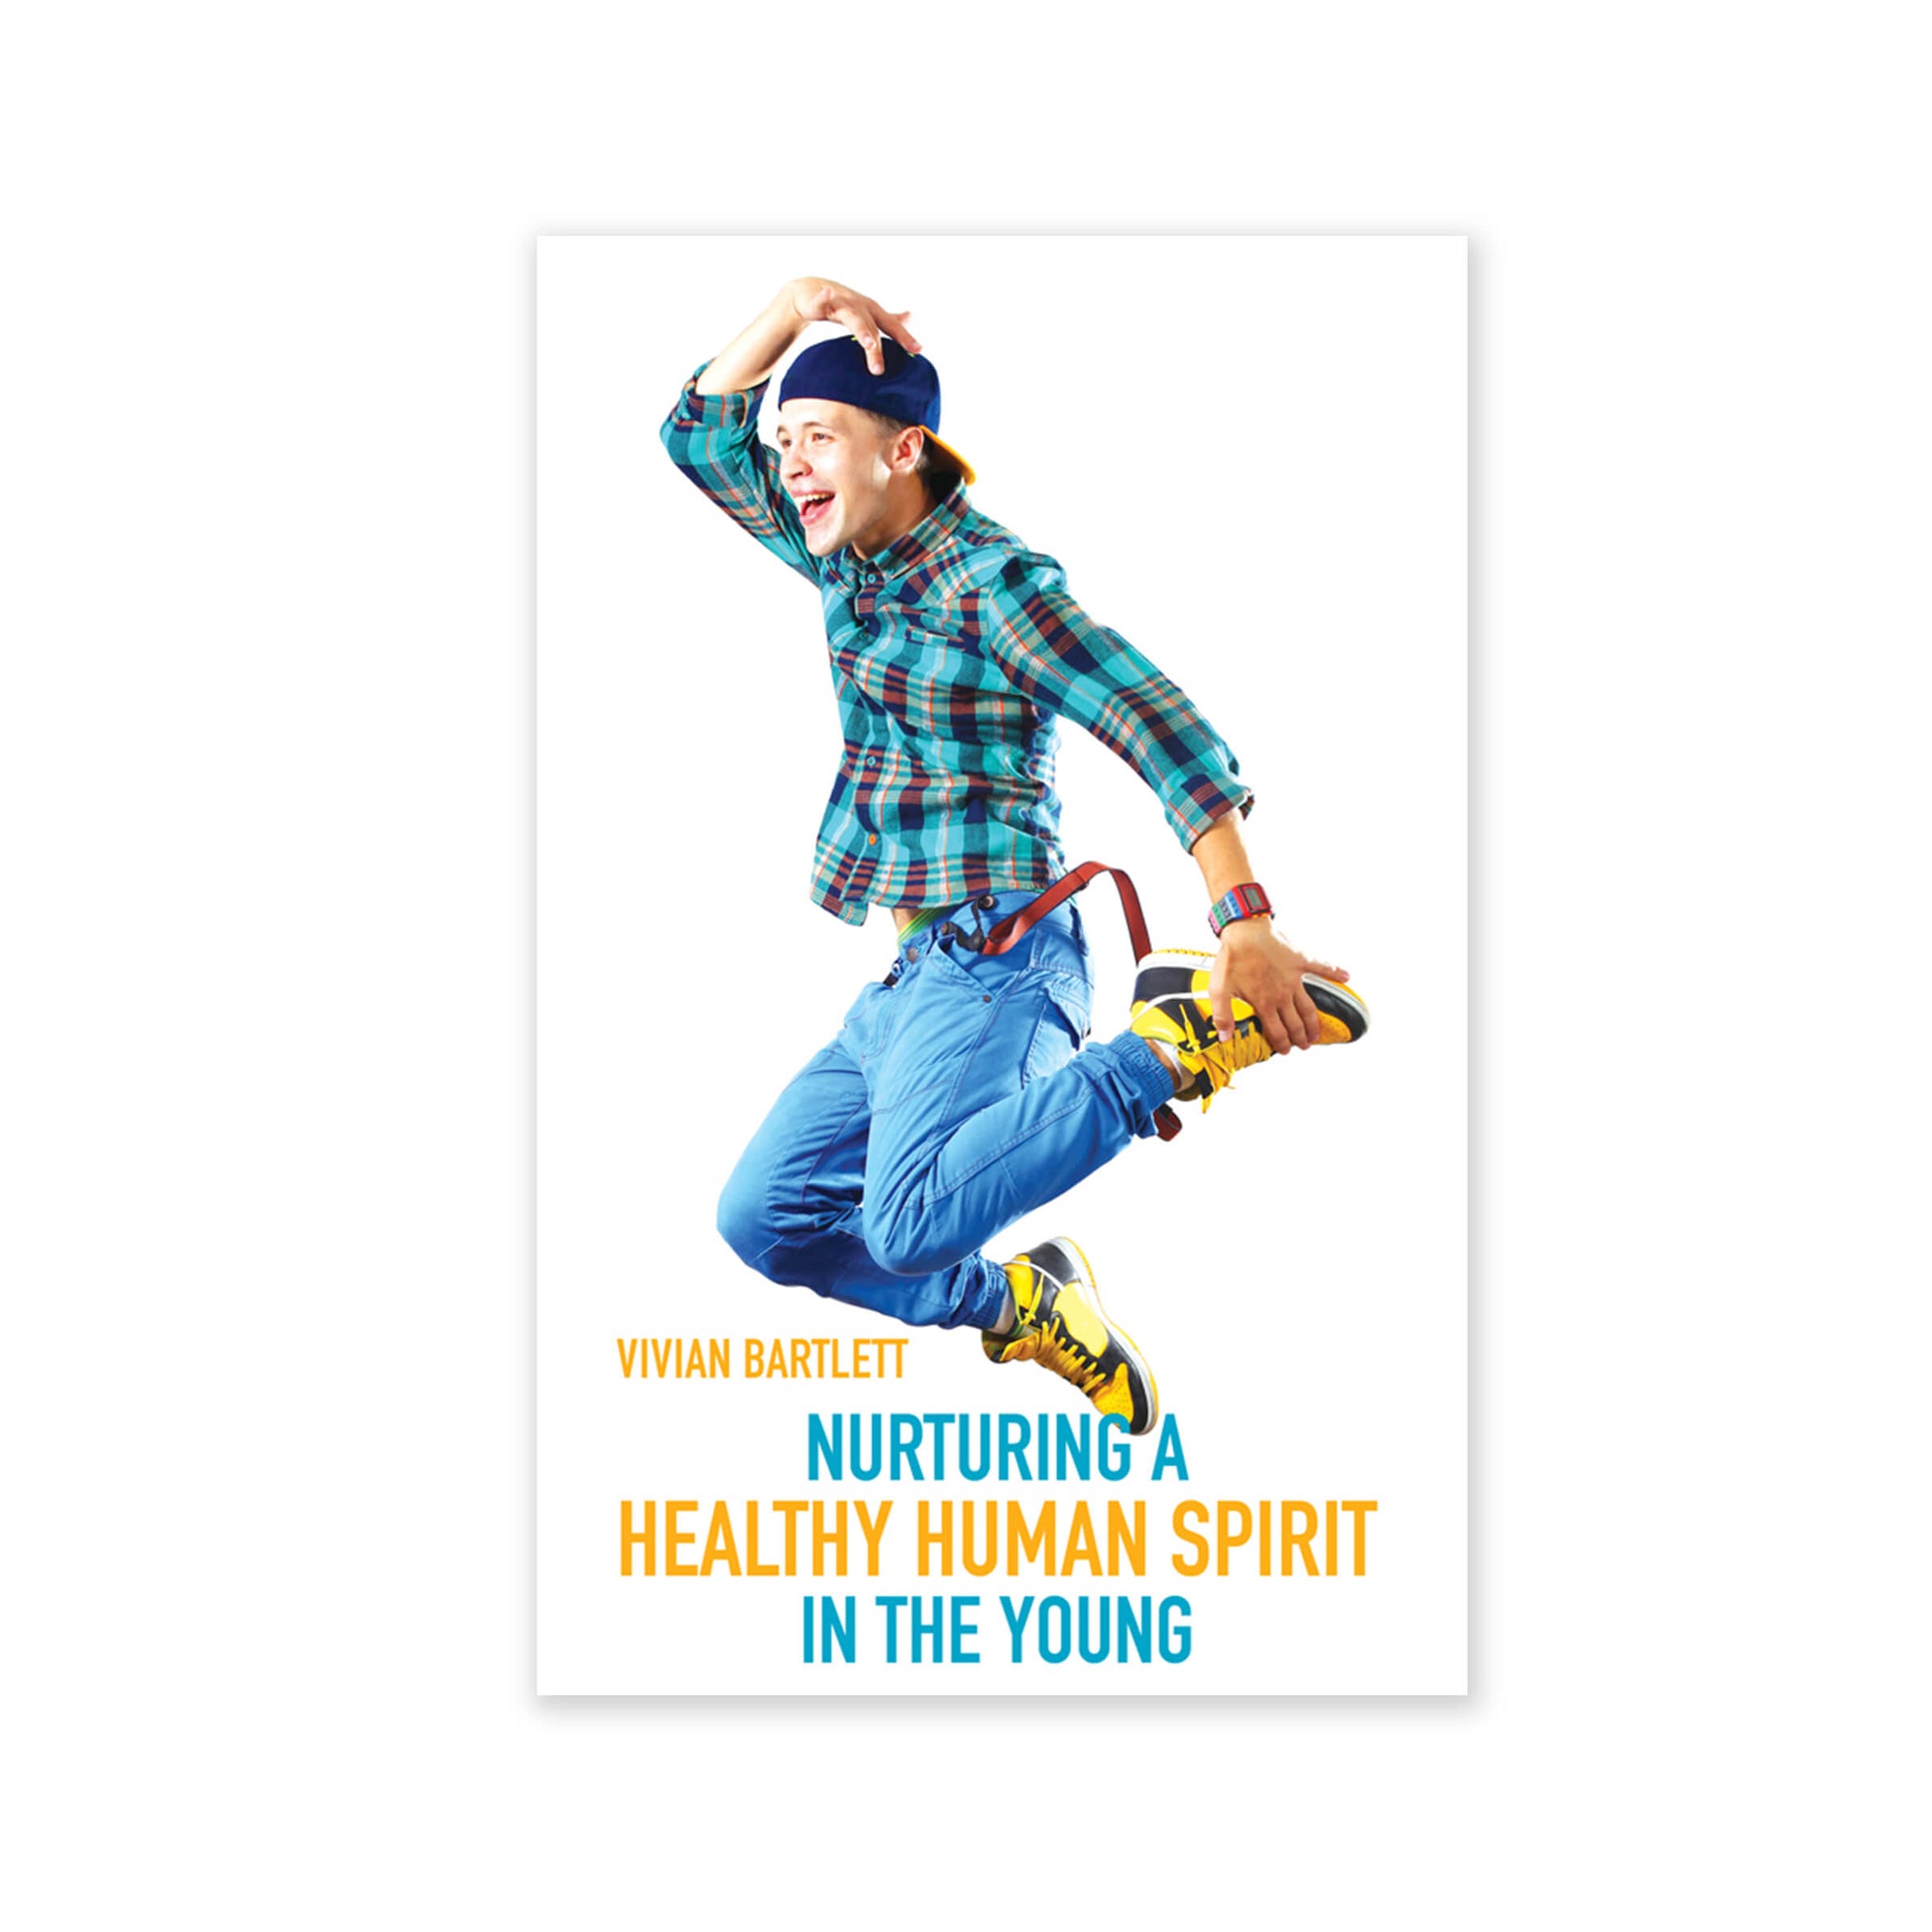 Nurturing a Healthy Human Spirit - Experience from the Swindon Young People’s Empowerment Programme